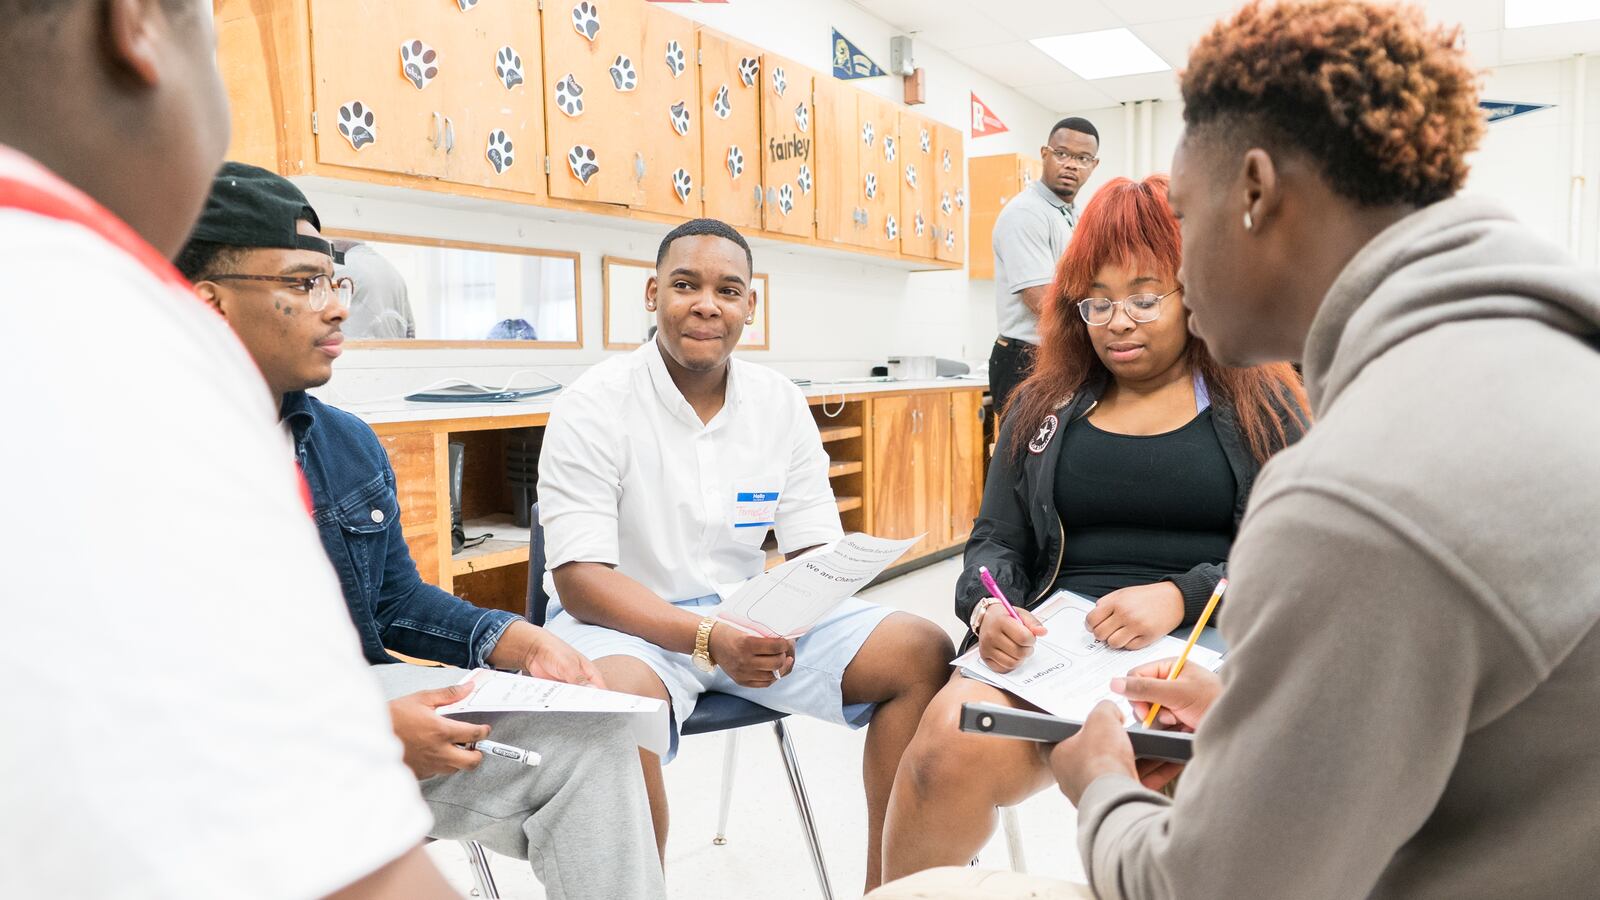 Students discuss advocacy topics during their session at Fairley High School, one of 10 schools in Shelby County participating in the program.